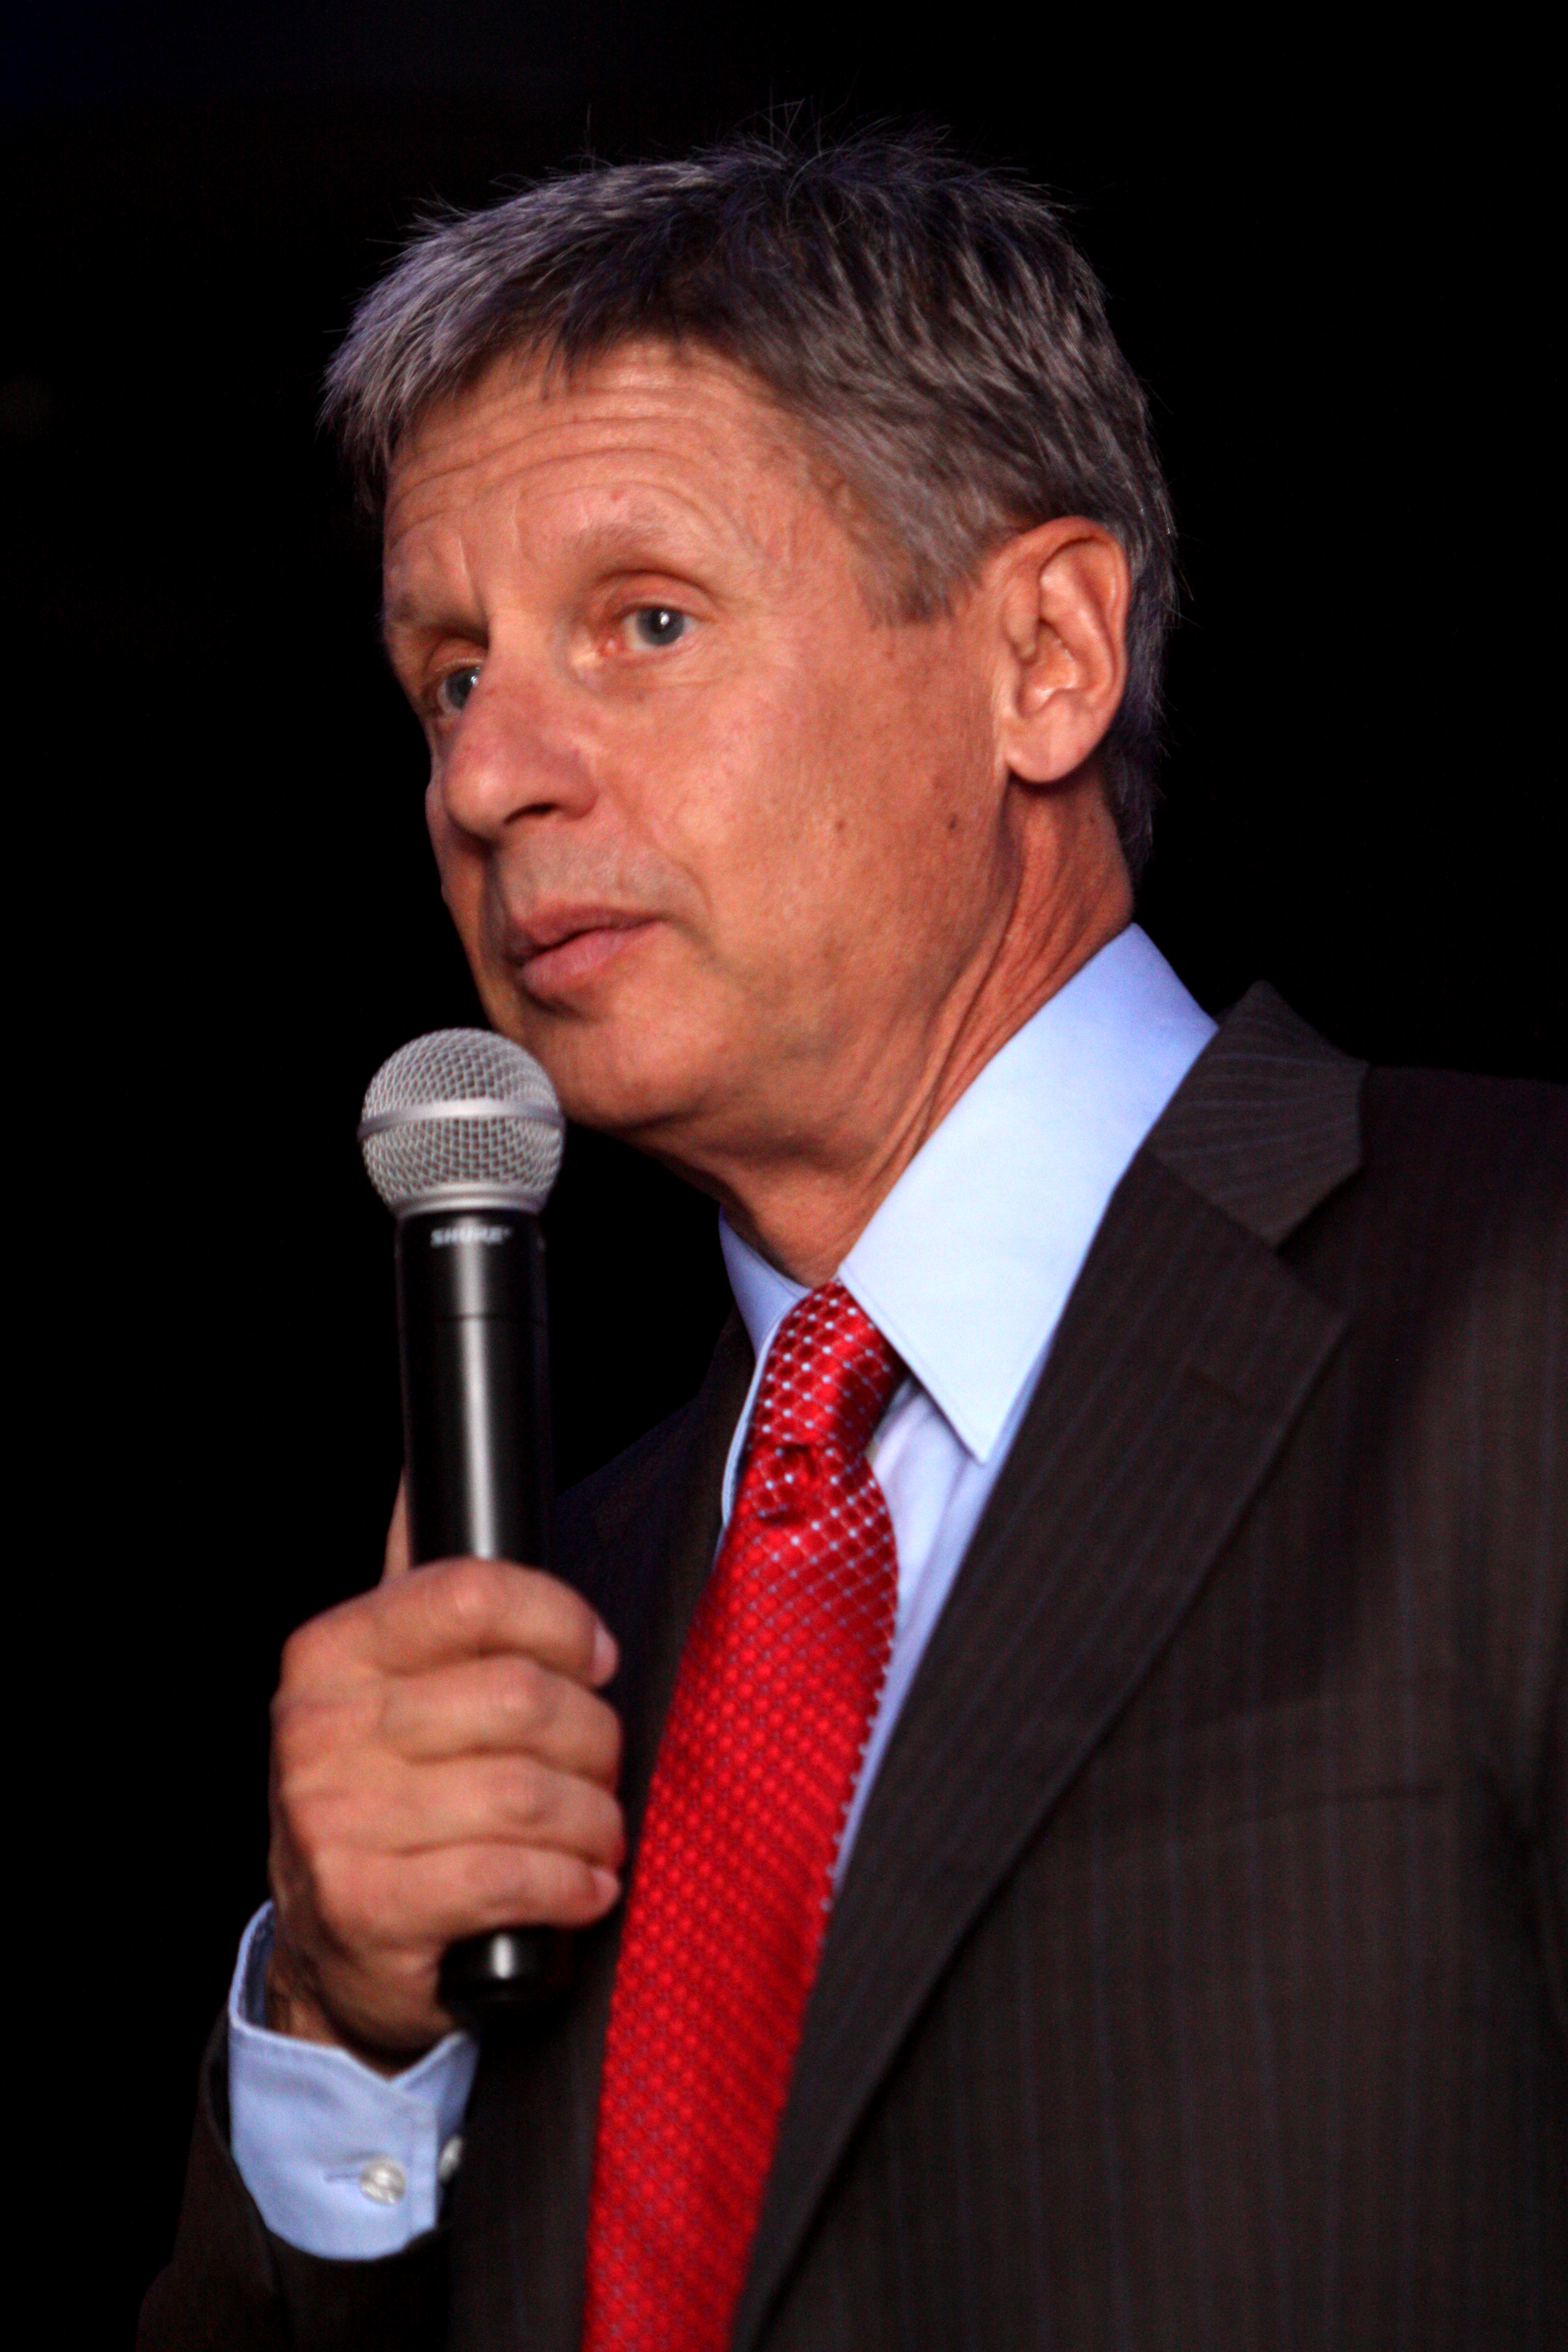 Did the Russians Influence Gary Johnson’s Vote Totals?